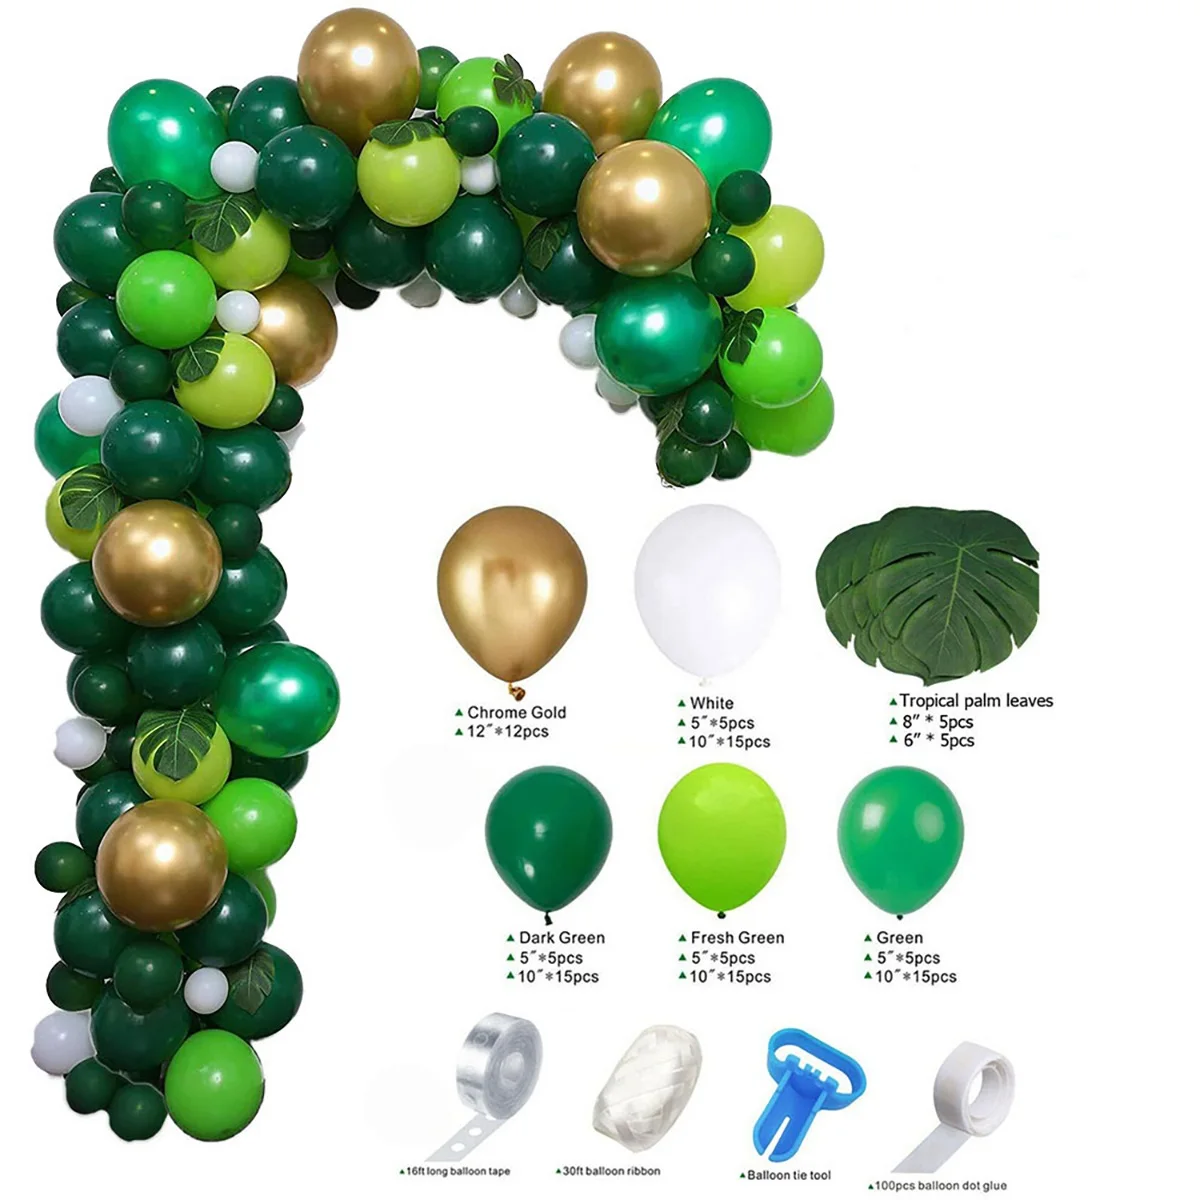 

167pcs Jungle Safari Theme Party Supplies Green Latex Balloons Garland Arch Kit Birthday Baby Shower Forest Wedding Decorations